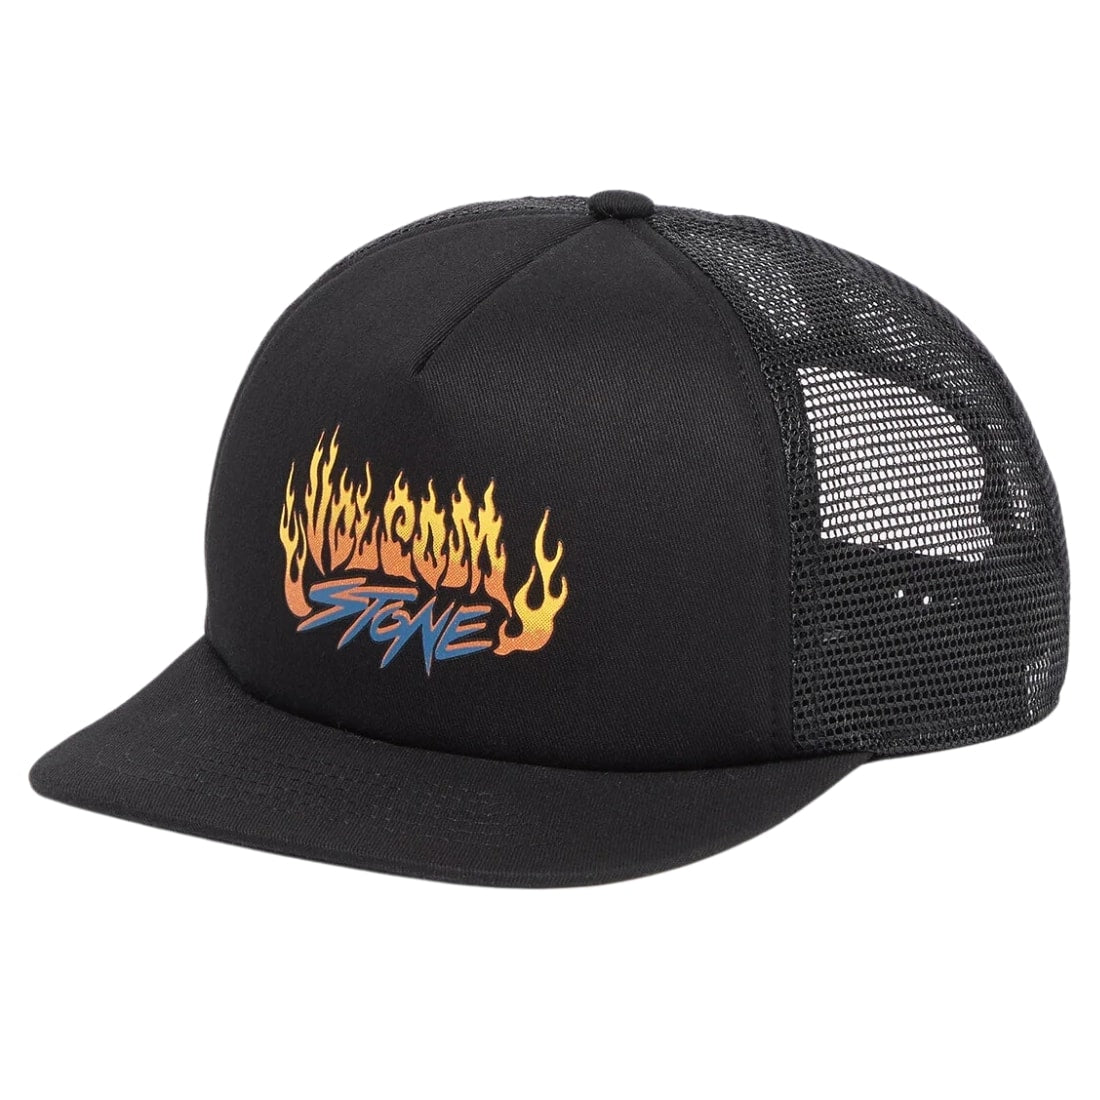 Boys Trucker Hats & Caps, FREE UK Delivery